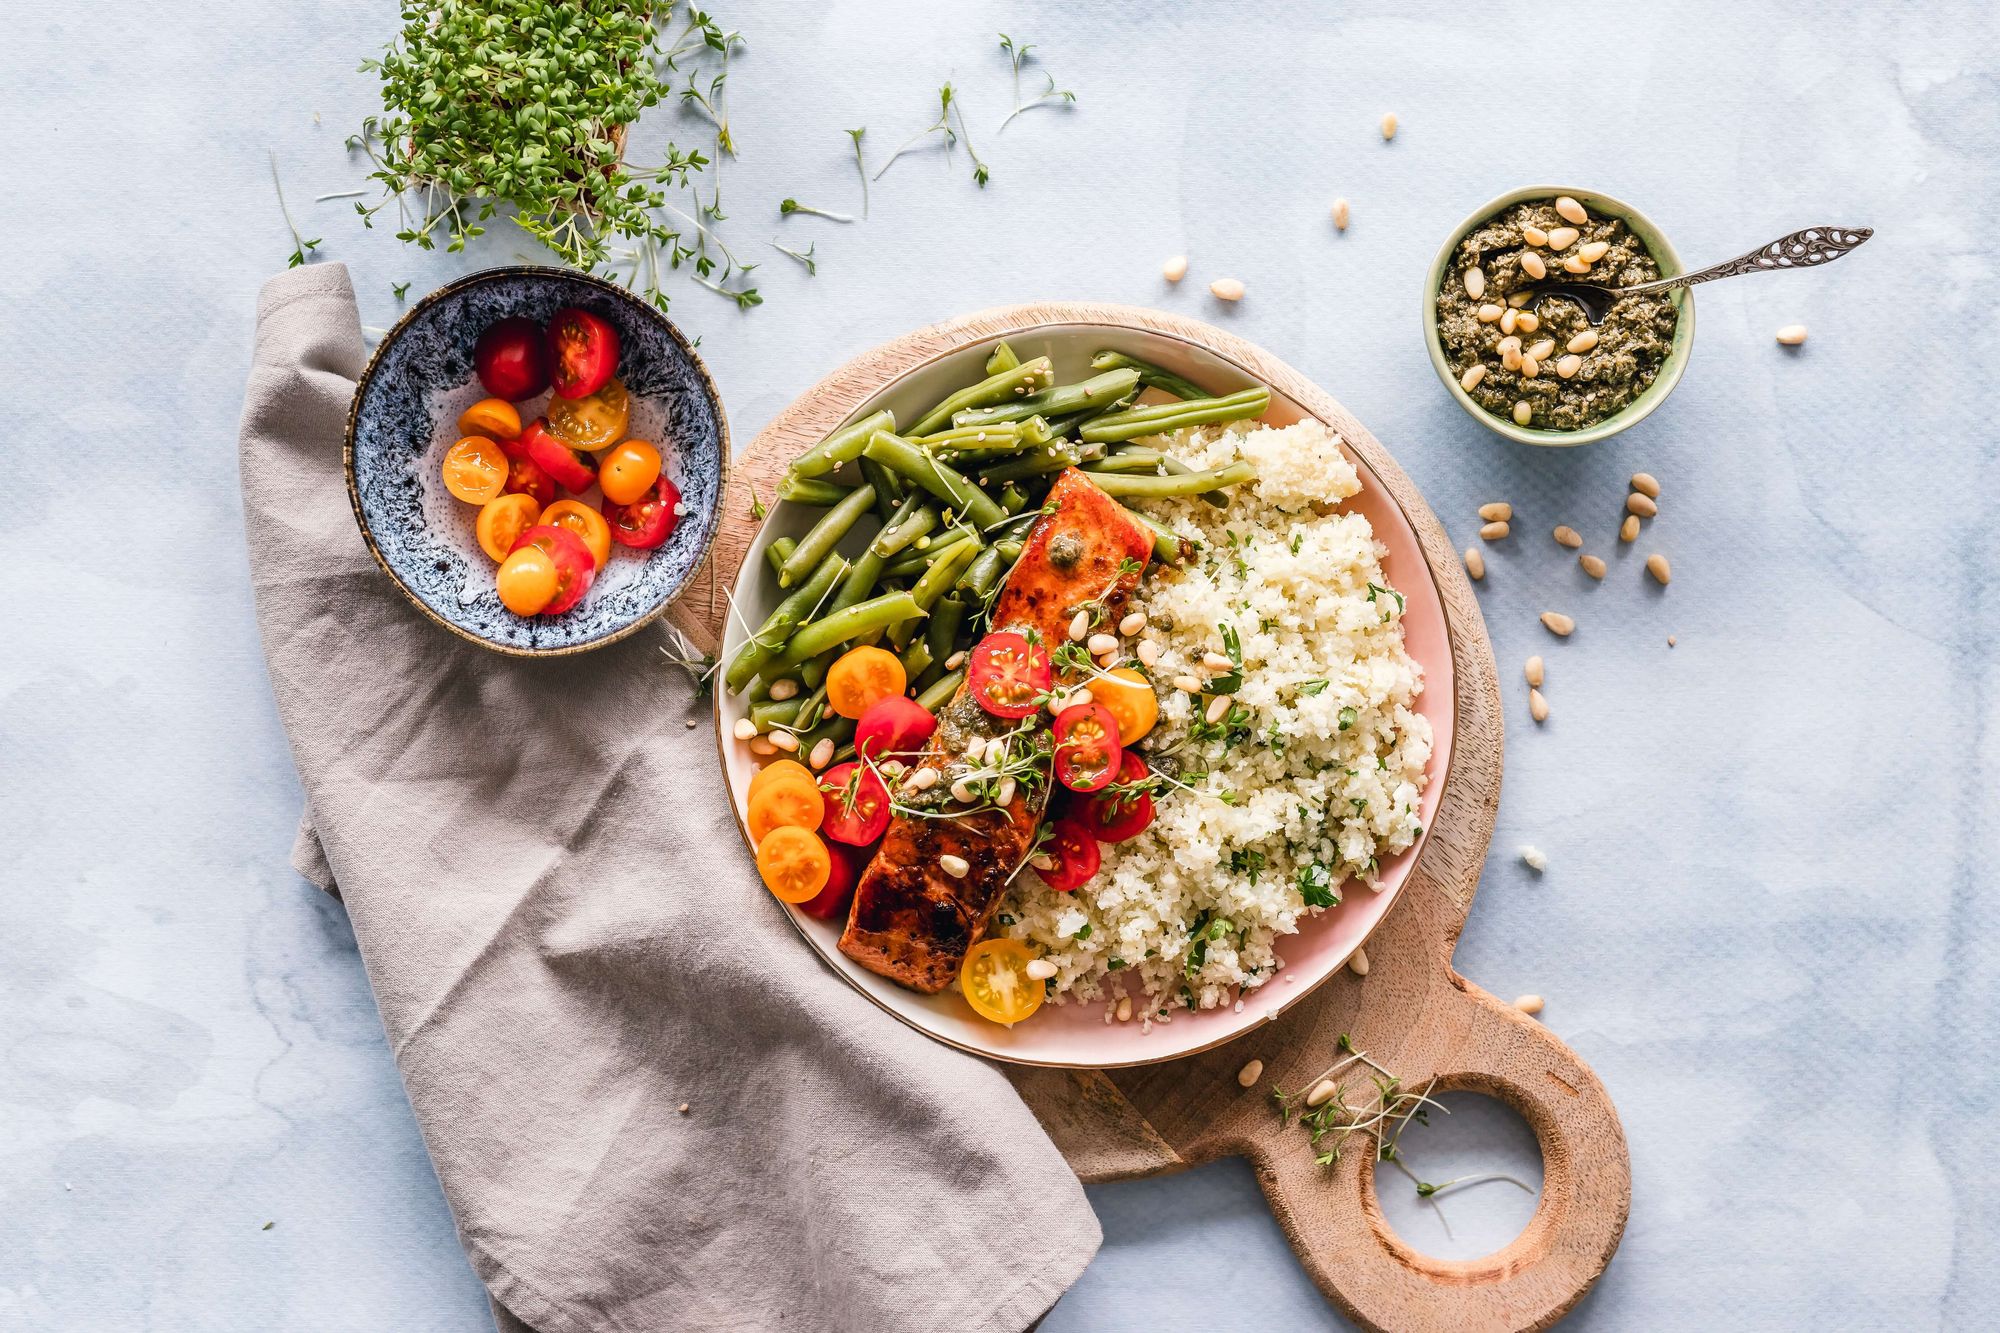 Cauliflower rice with salmon, green beans, and tomatoes - a delicious and healthy meal bursting with flavours!